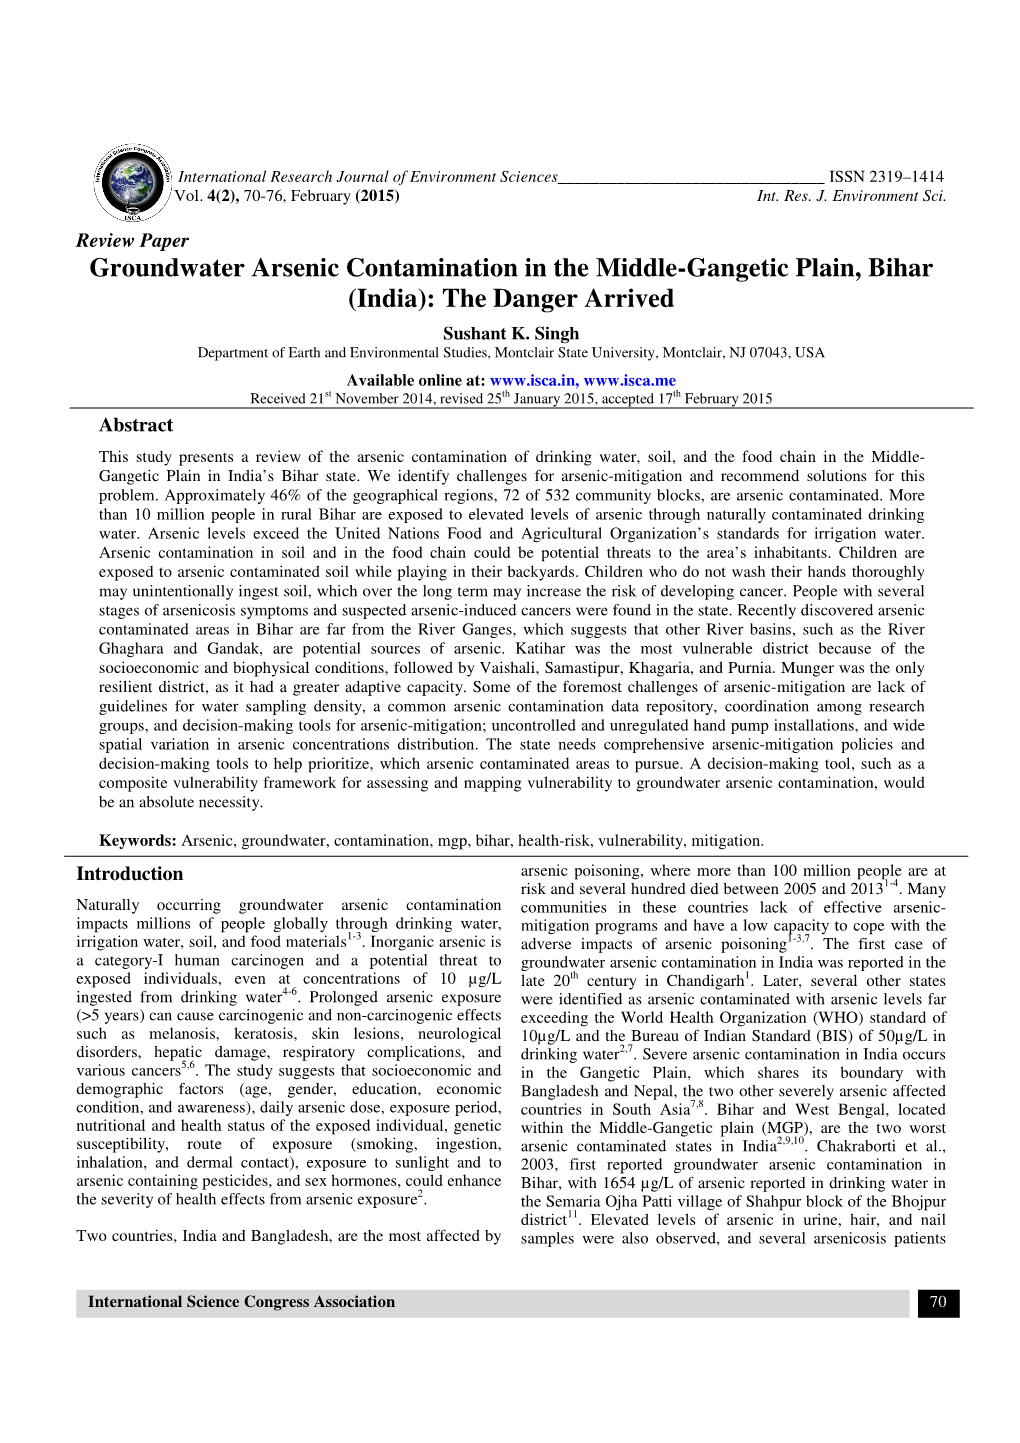 Groundwater Arsenic Contamination in the Middle-Gangetic Plain, Bihar (India): the Danger Arrived